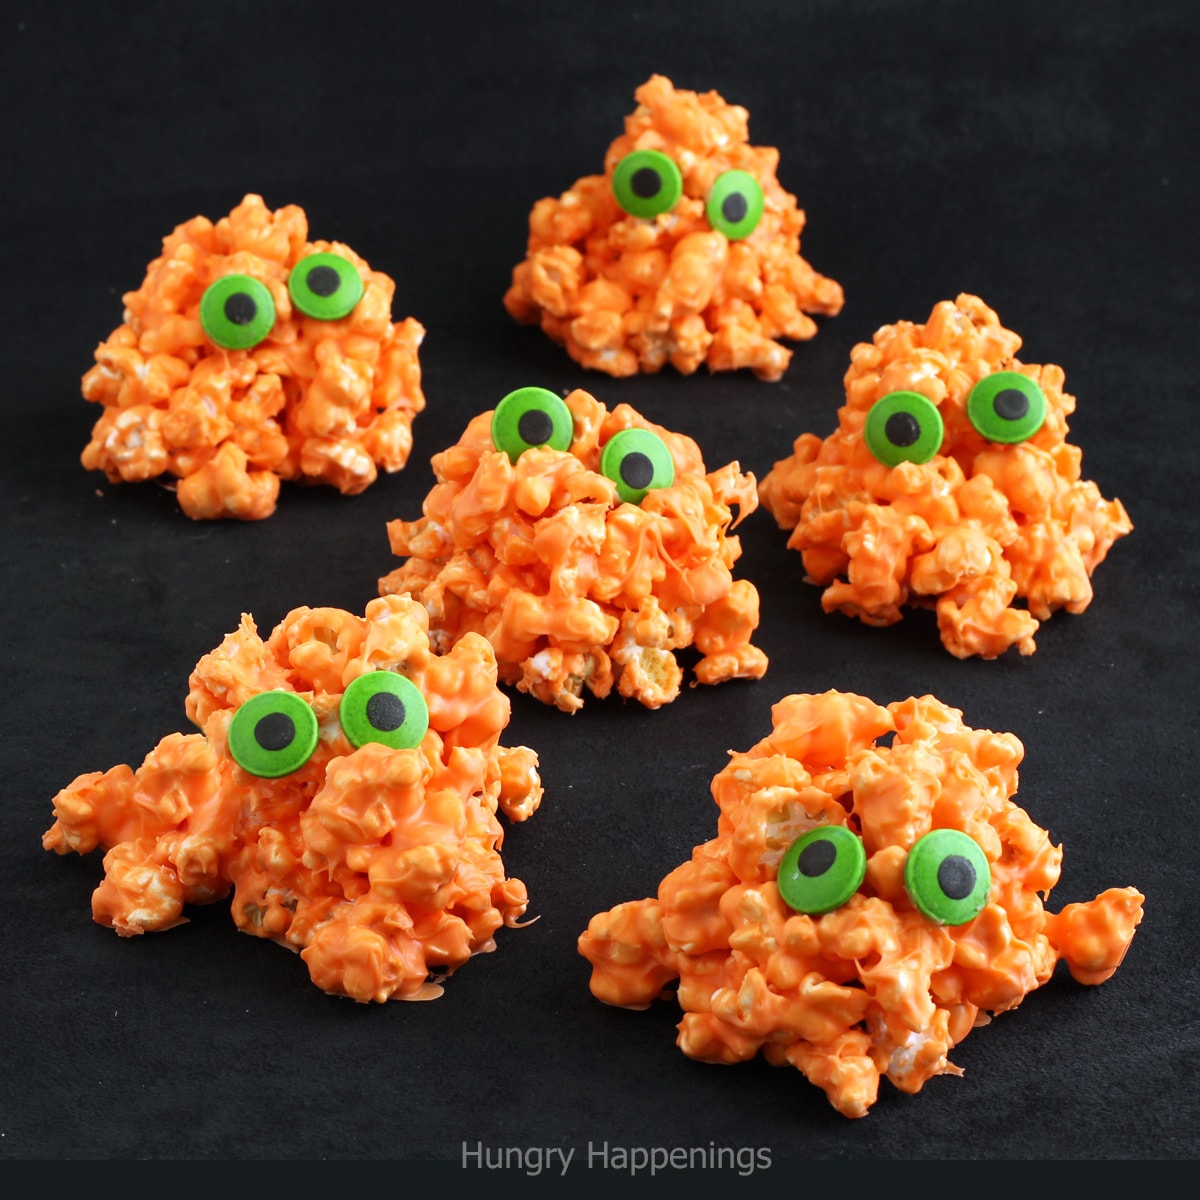 popcorn monsters made with orange-colored white chocolate popcorn and green candy eyes.